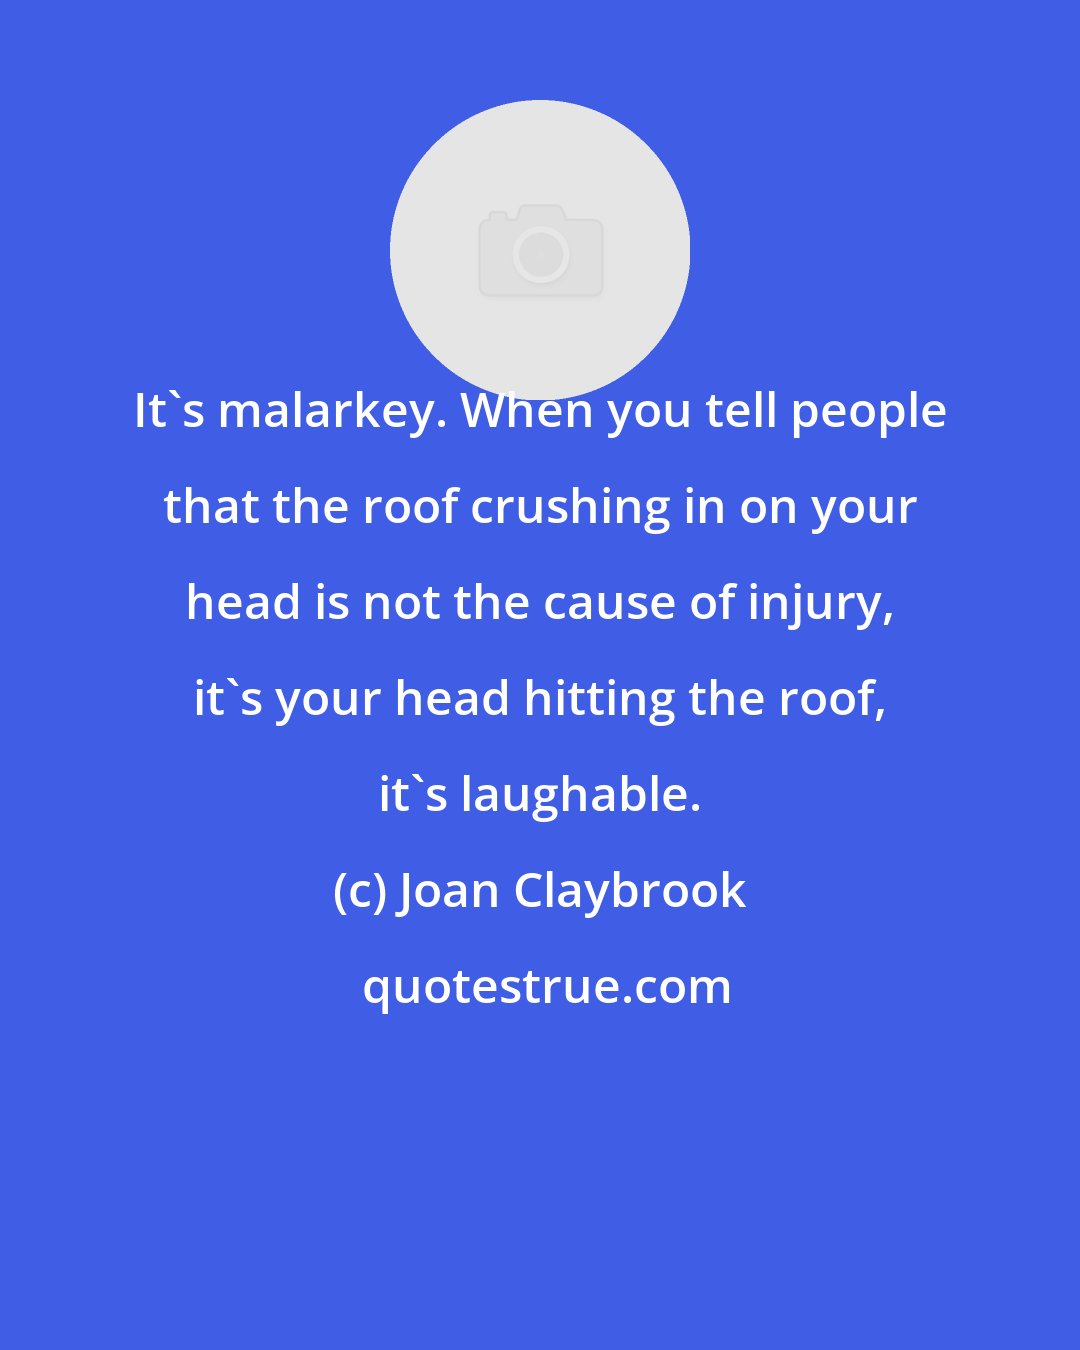 Joan Claybrook: It's malarkey. When you tell people that the roof crushing in on your head is not the cause of injury, it's your head hitting the roof, it's laughable.